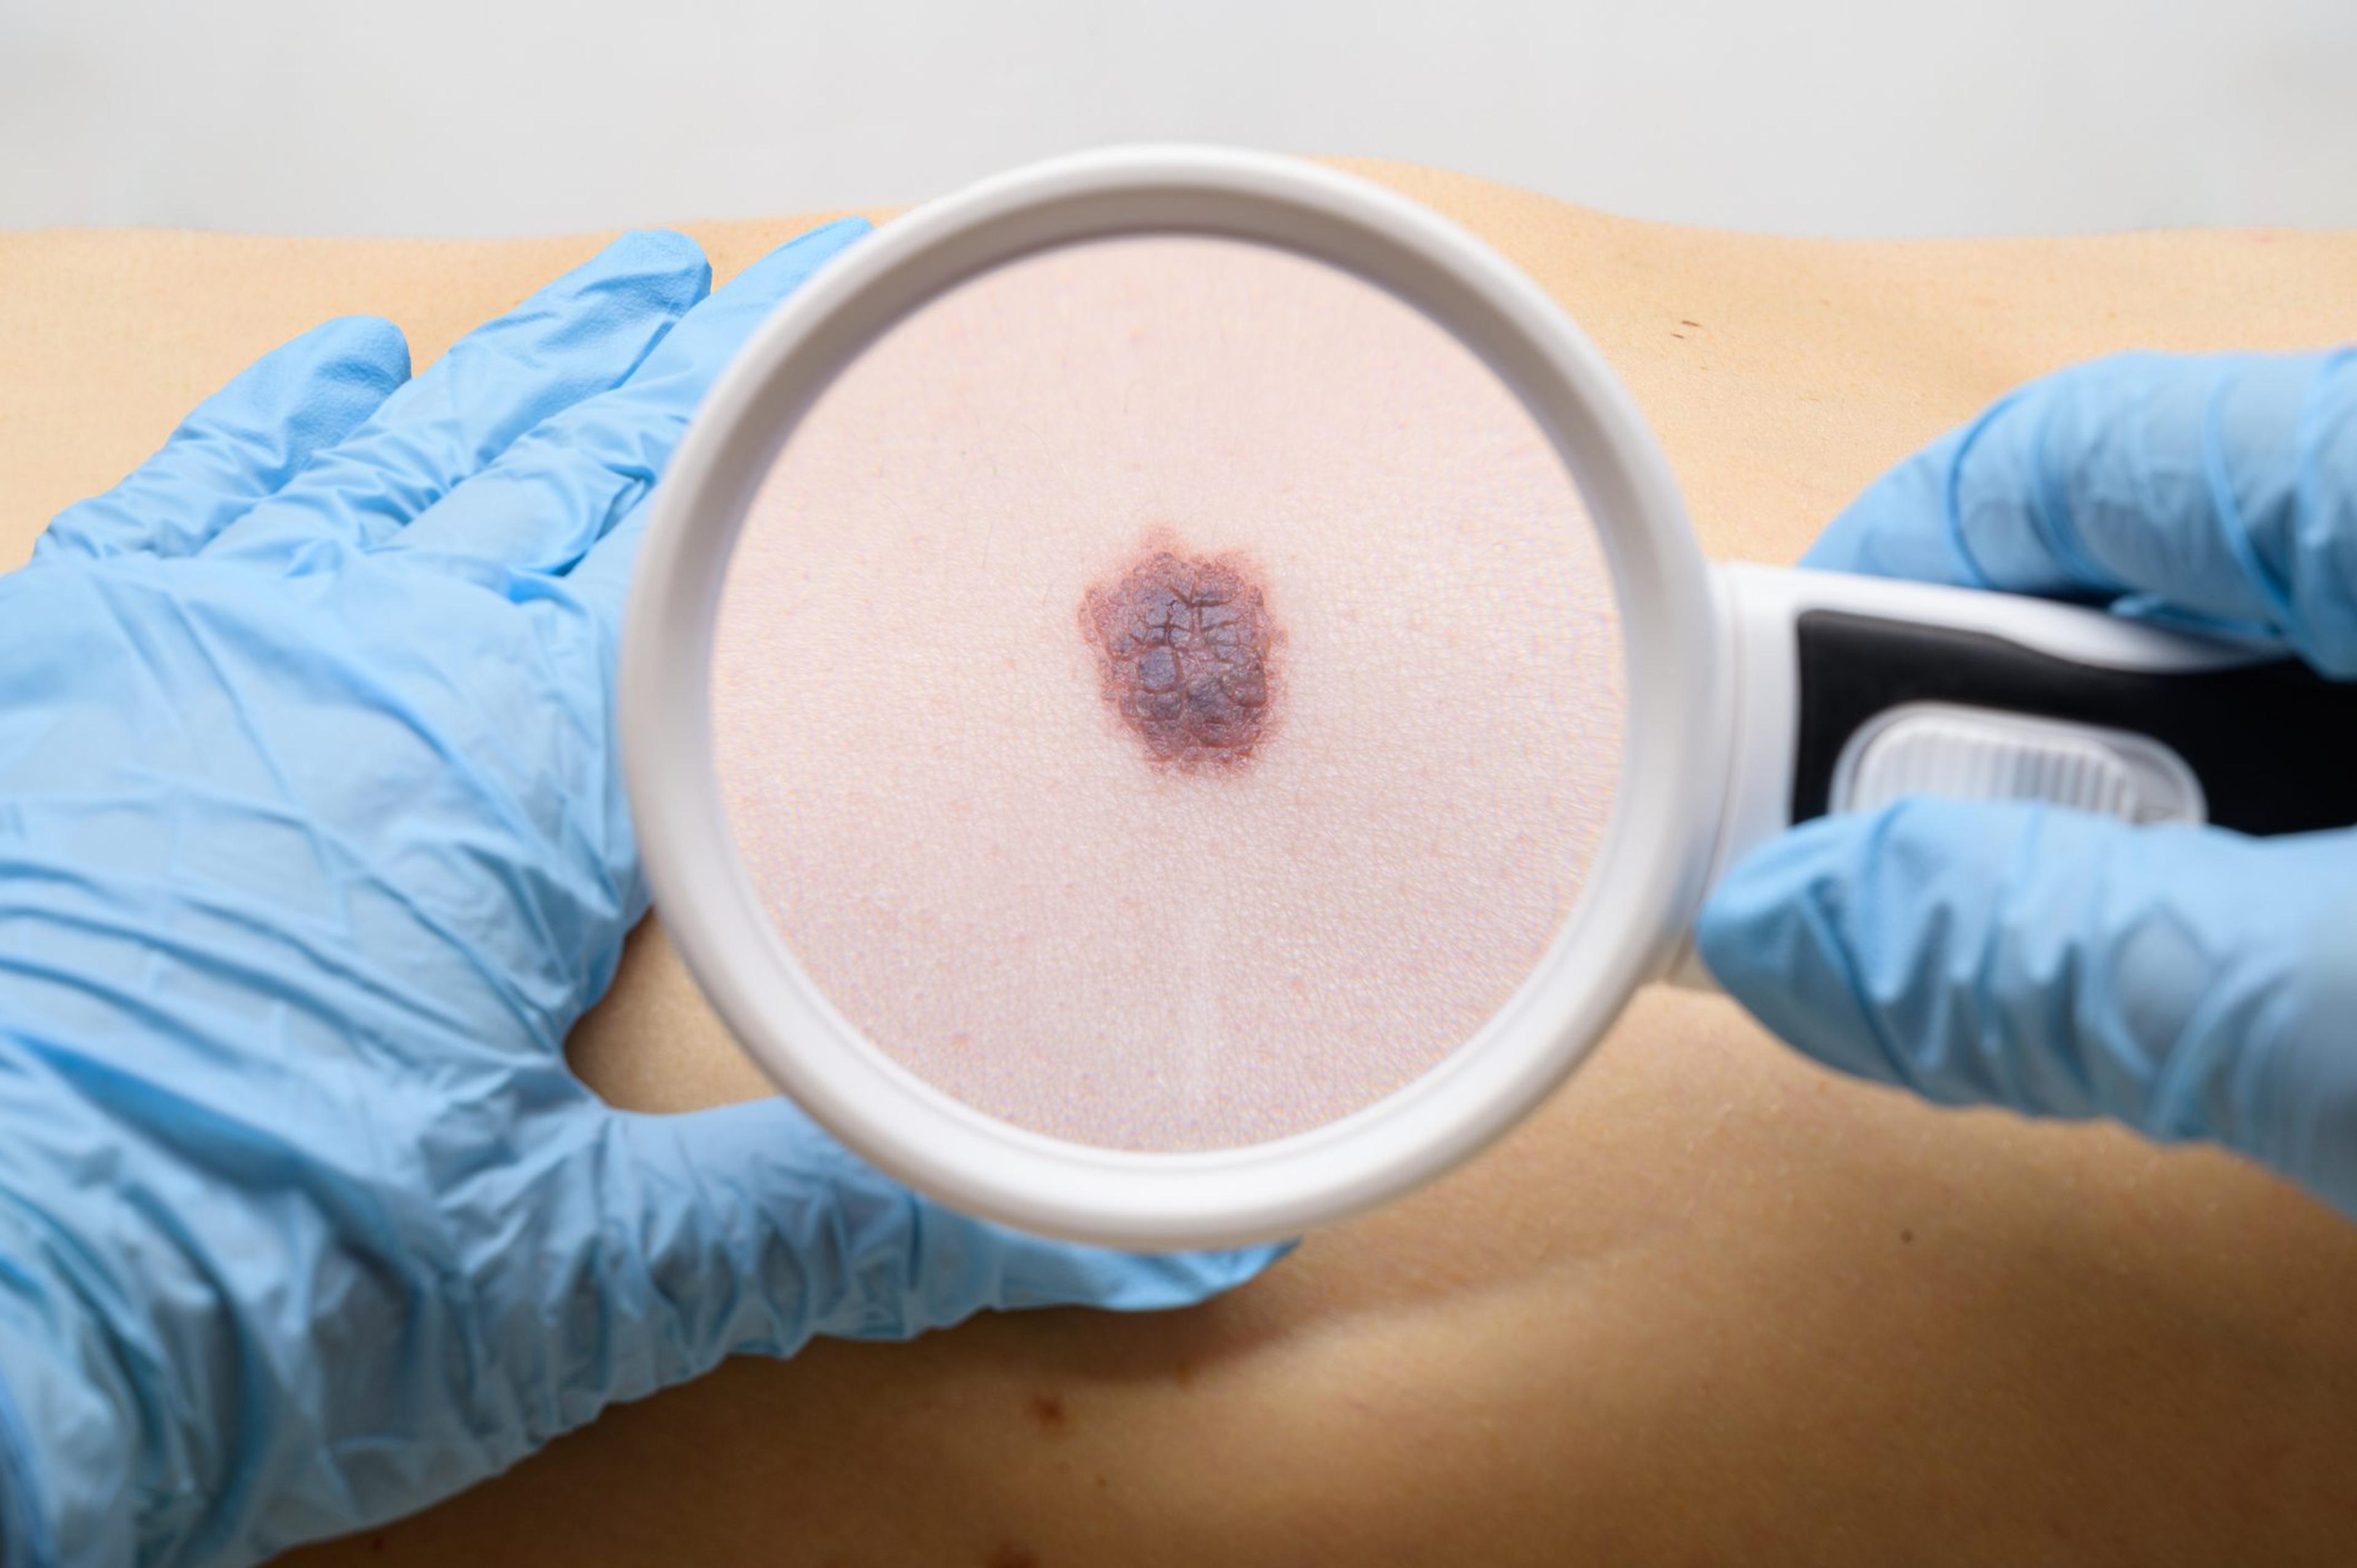 Examination of a mole on the patient's body. The concept of studying moles to prevent the development of skin cancer or melanoma.